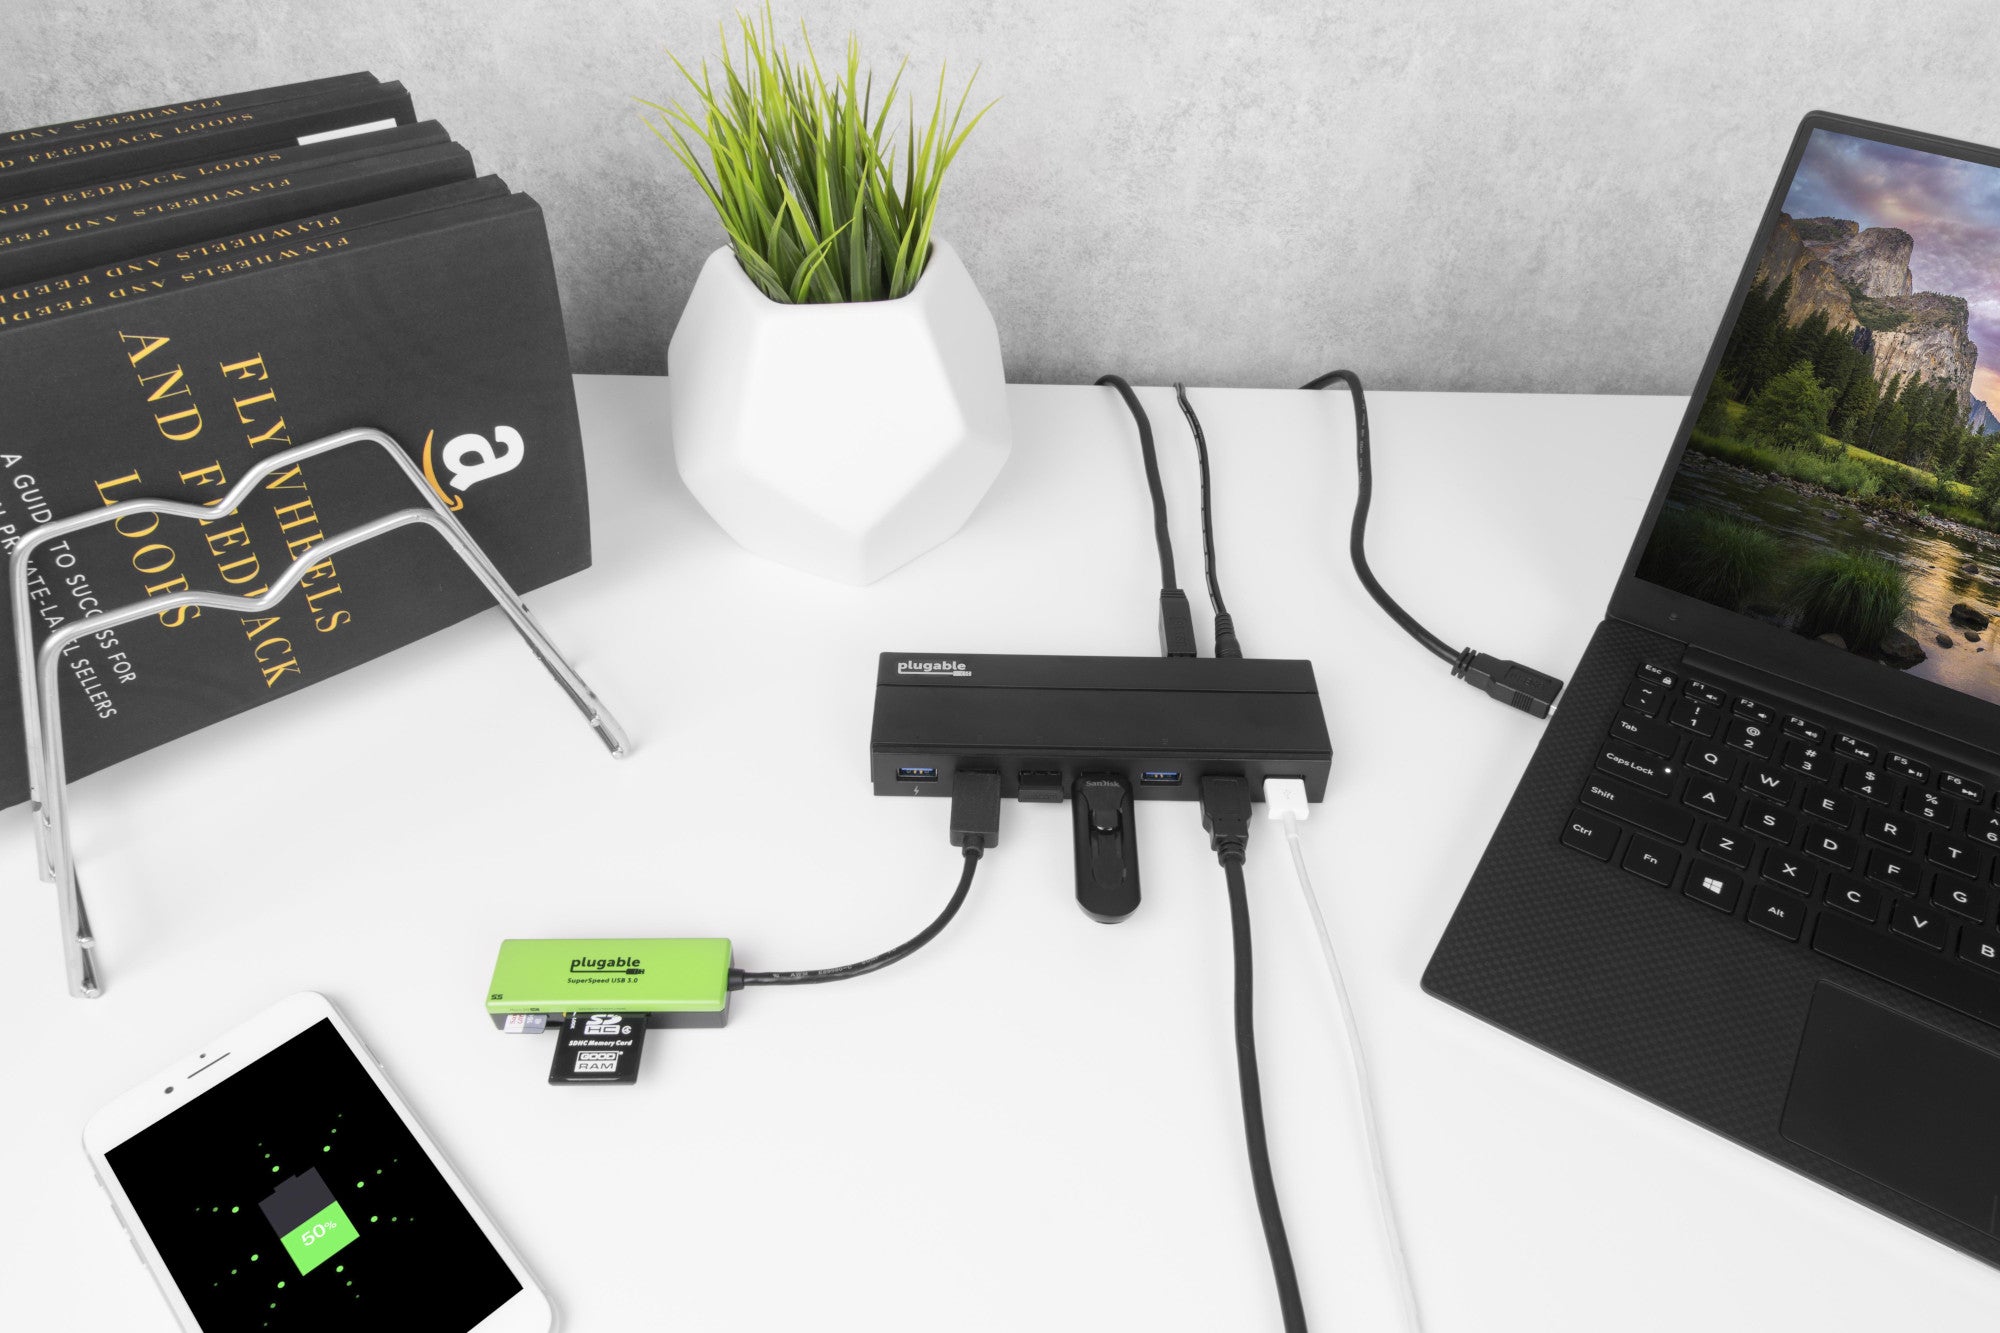 7-Port USB-A Hub with 5V 3A Power Supply, USB Hubs and Cards, USB Cables,  Adapters, and Hubs